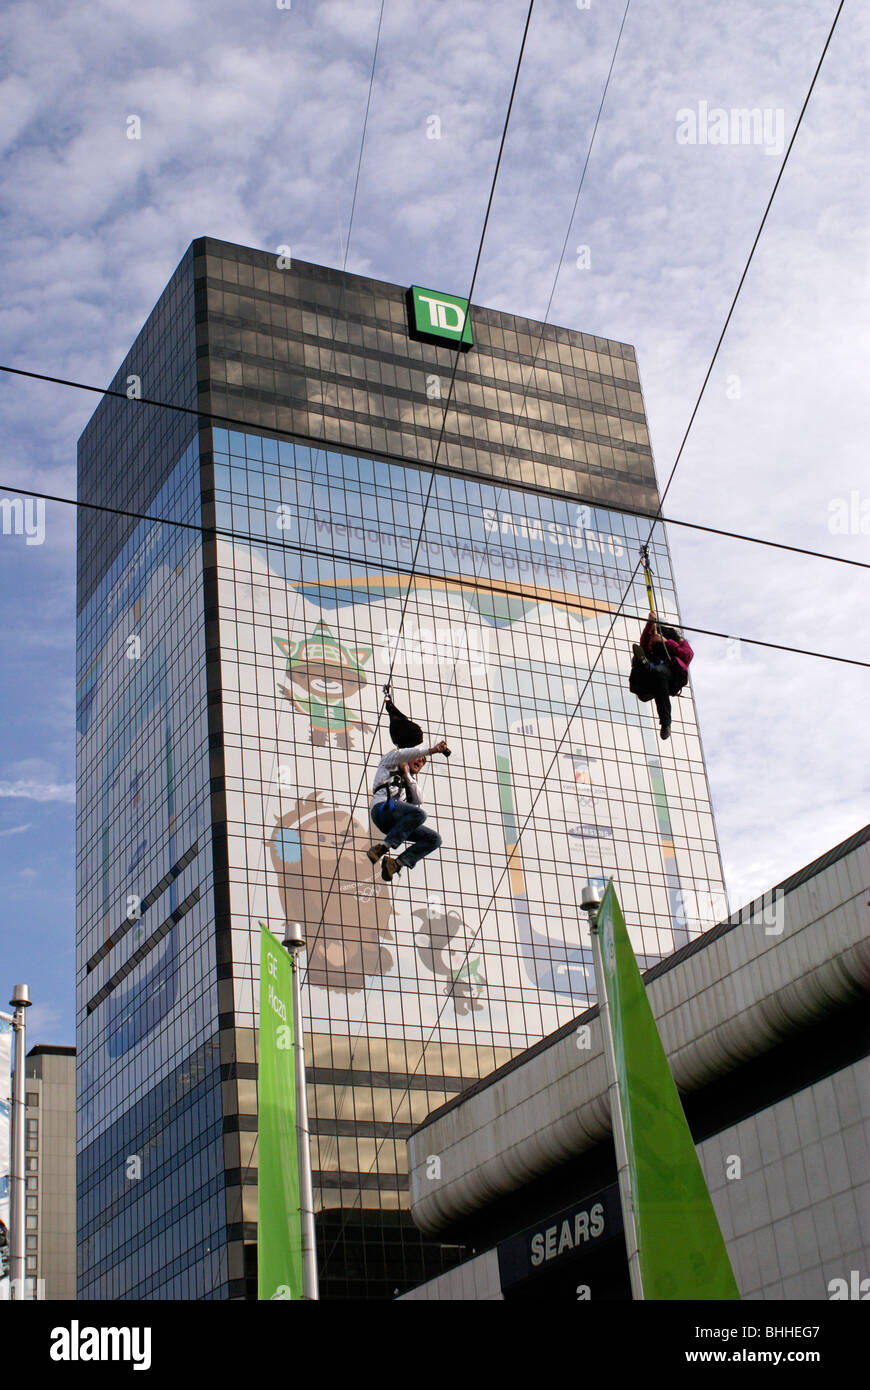 Person ziplining over Robson Square in downtown Vancouver, 2010 Winter Olympic Games, Vancouver, British Columbia, Canada. Stock Photo